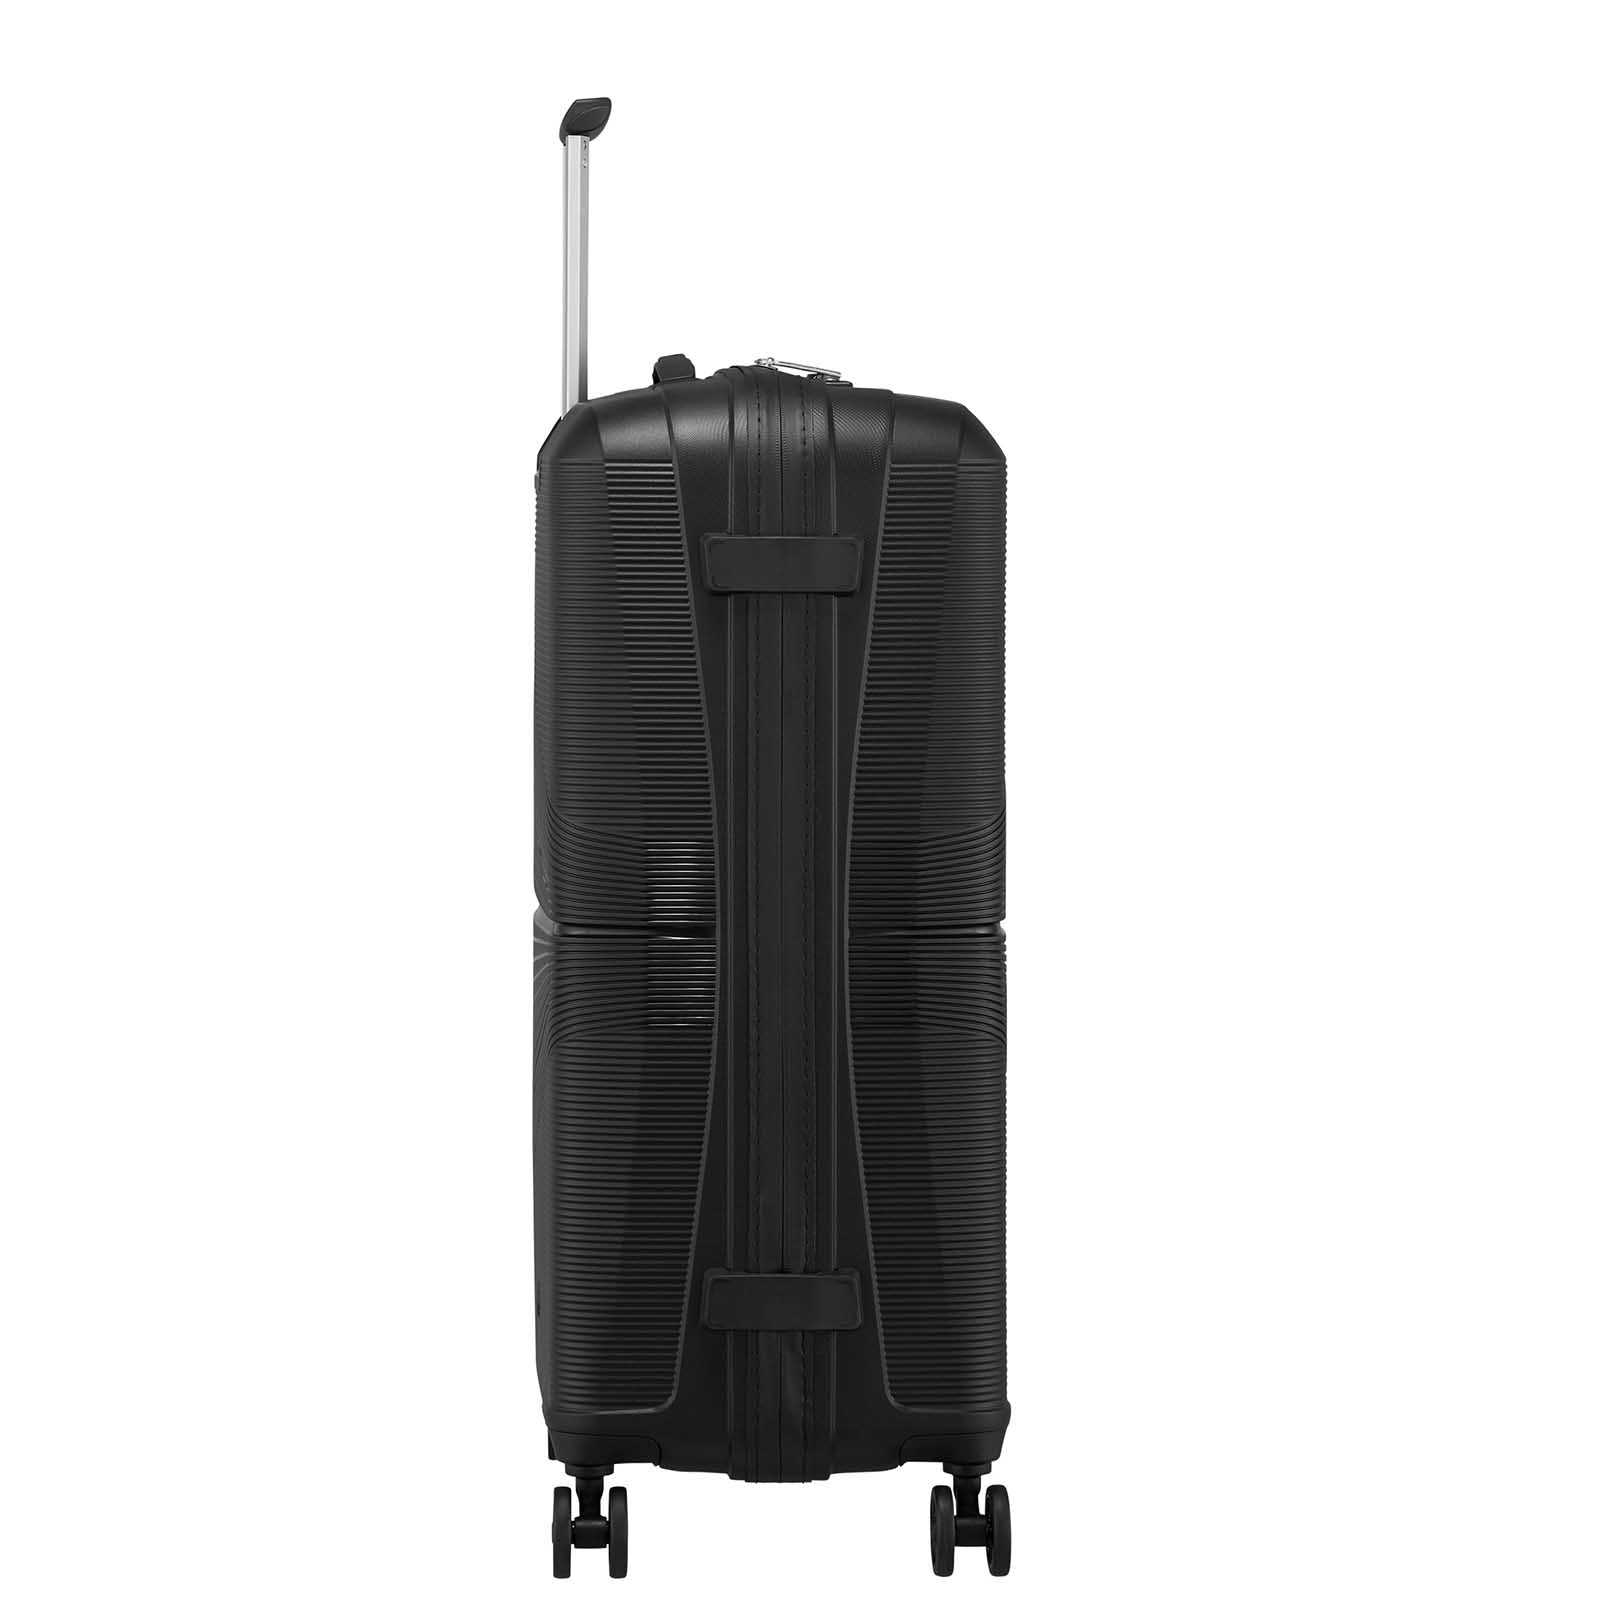 American-Tourister-Airconic-67cm-Suitcase-Onyx-Black-Side